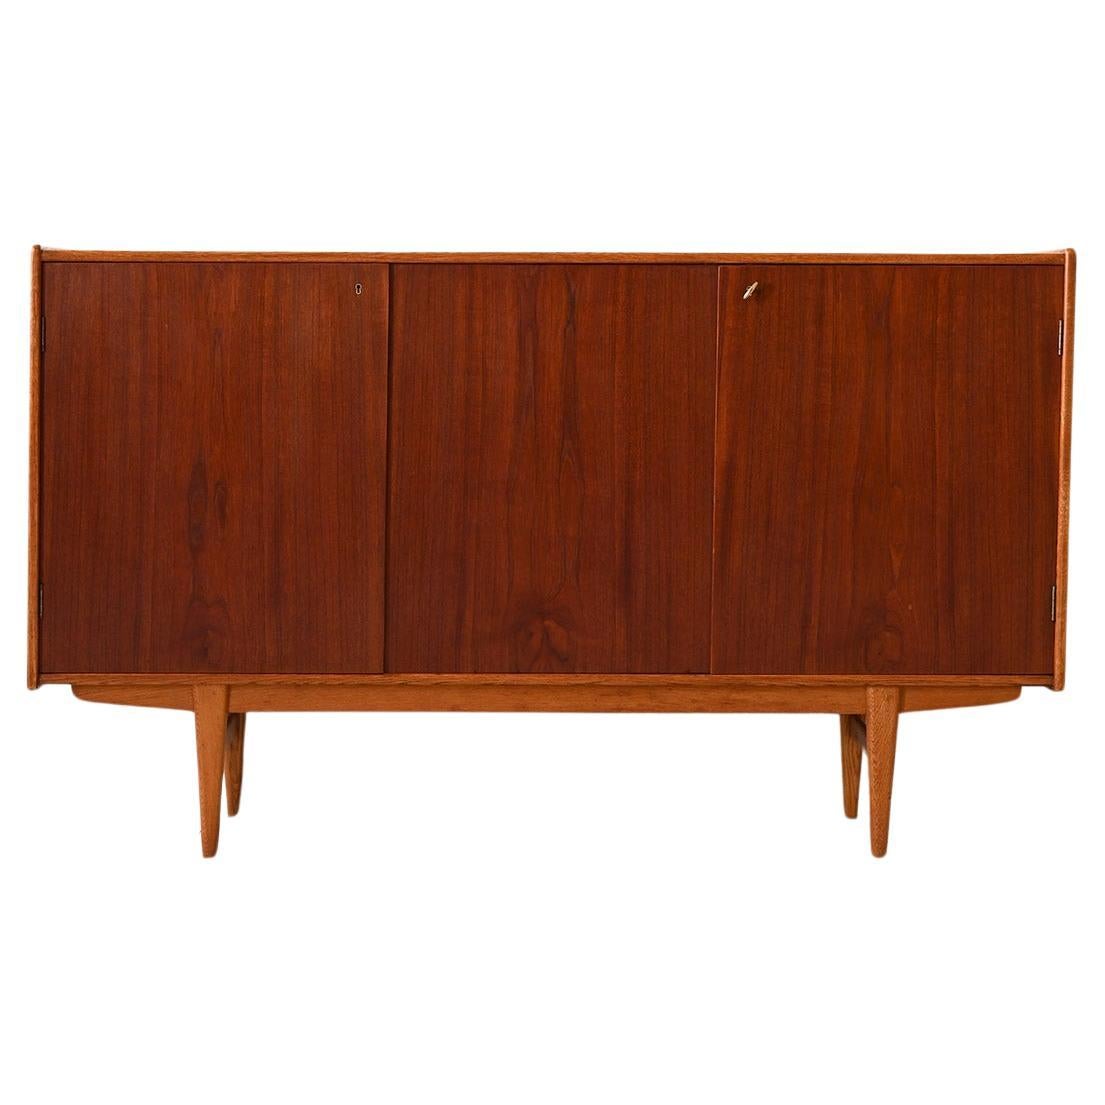 1950s wooden sideboard For Sale